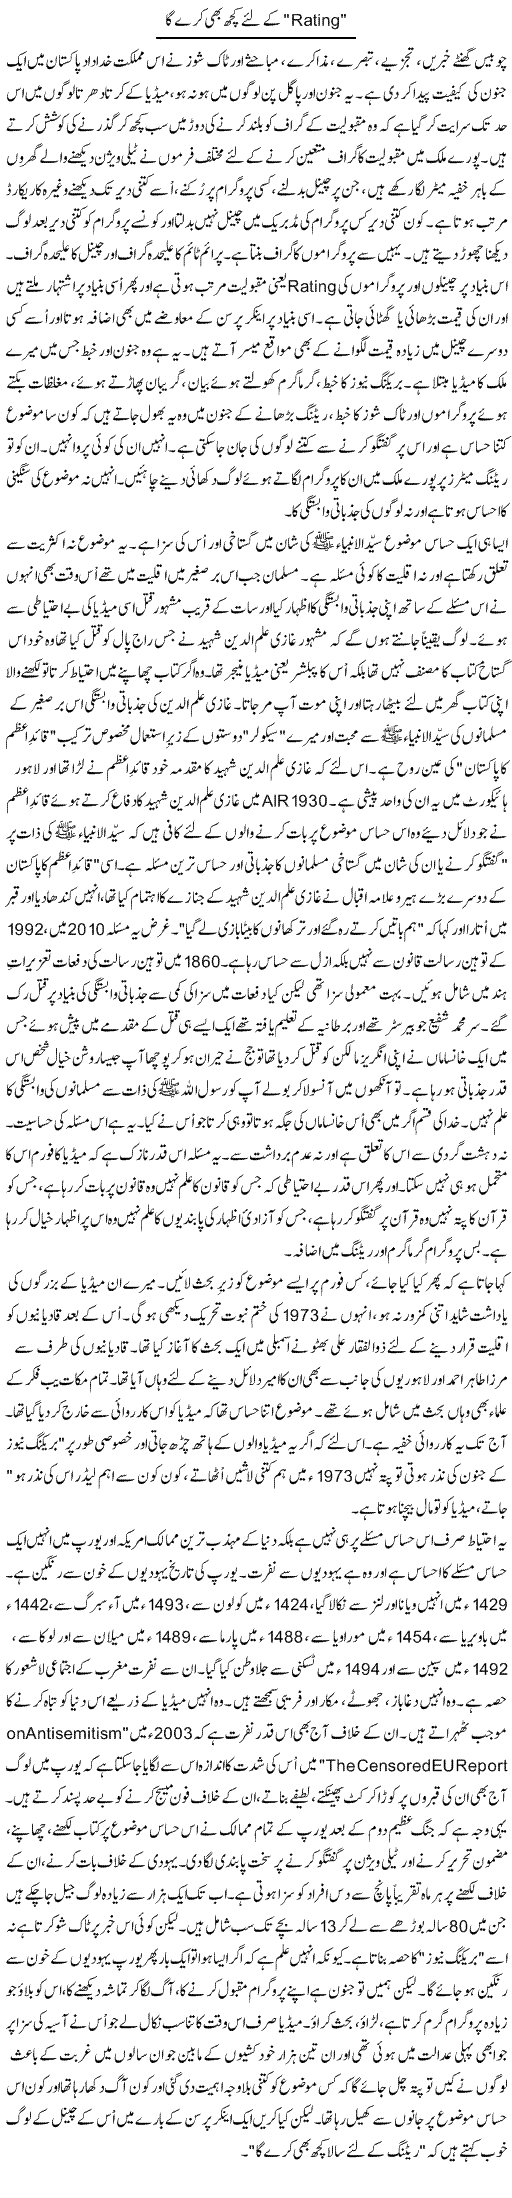 Will Do Everything For Rating - Urdu Political Column By Orya Maqbool